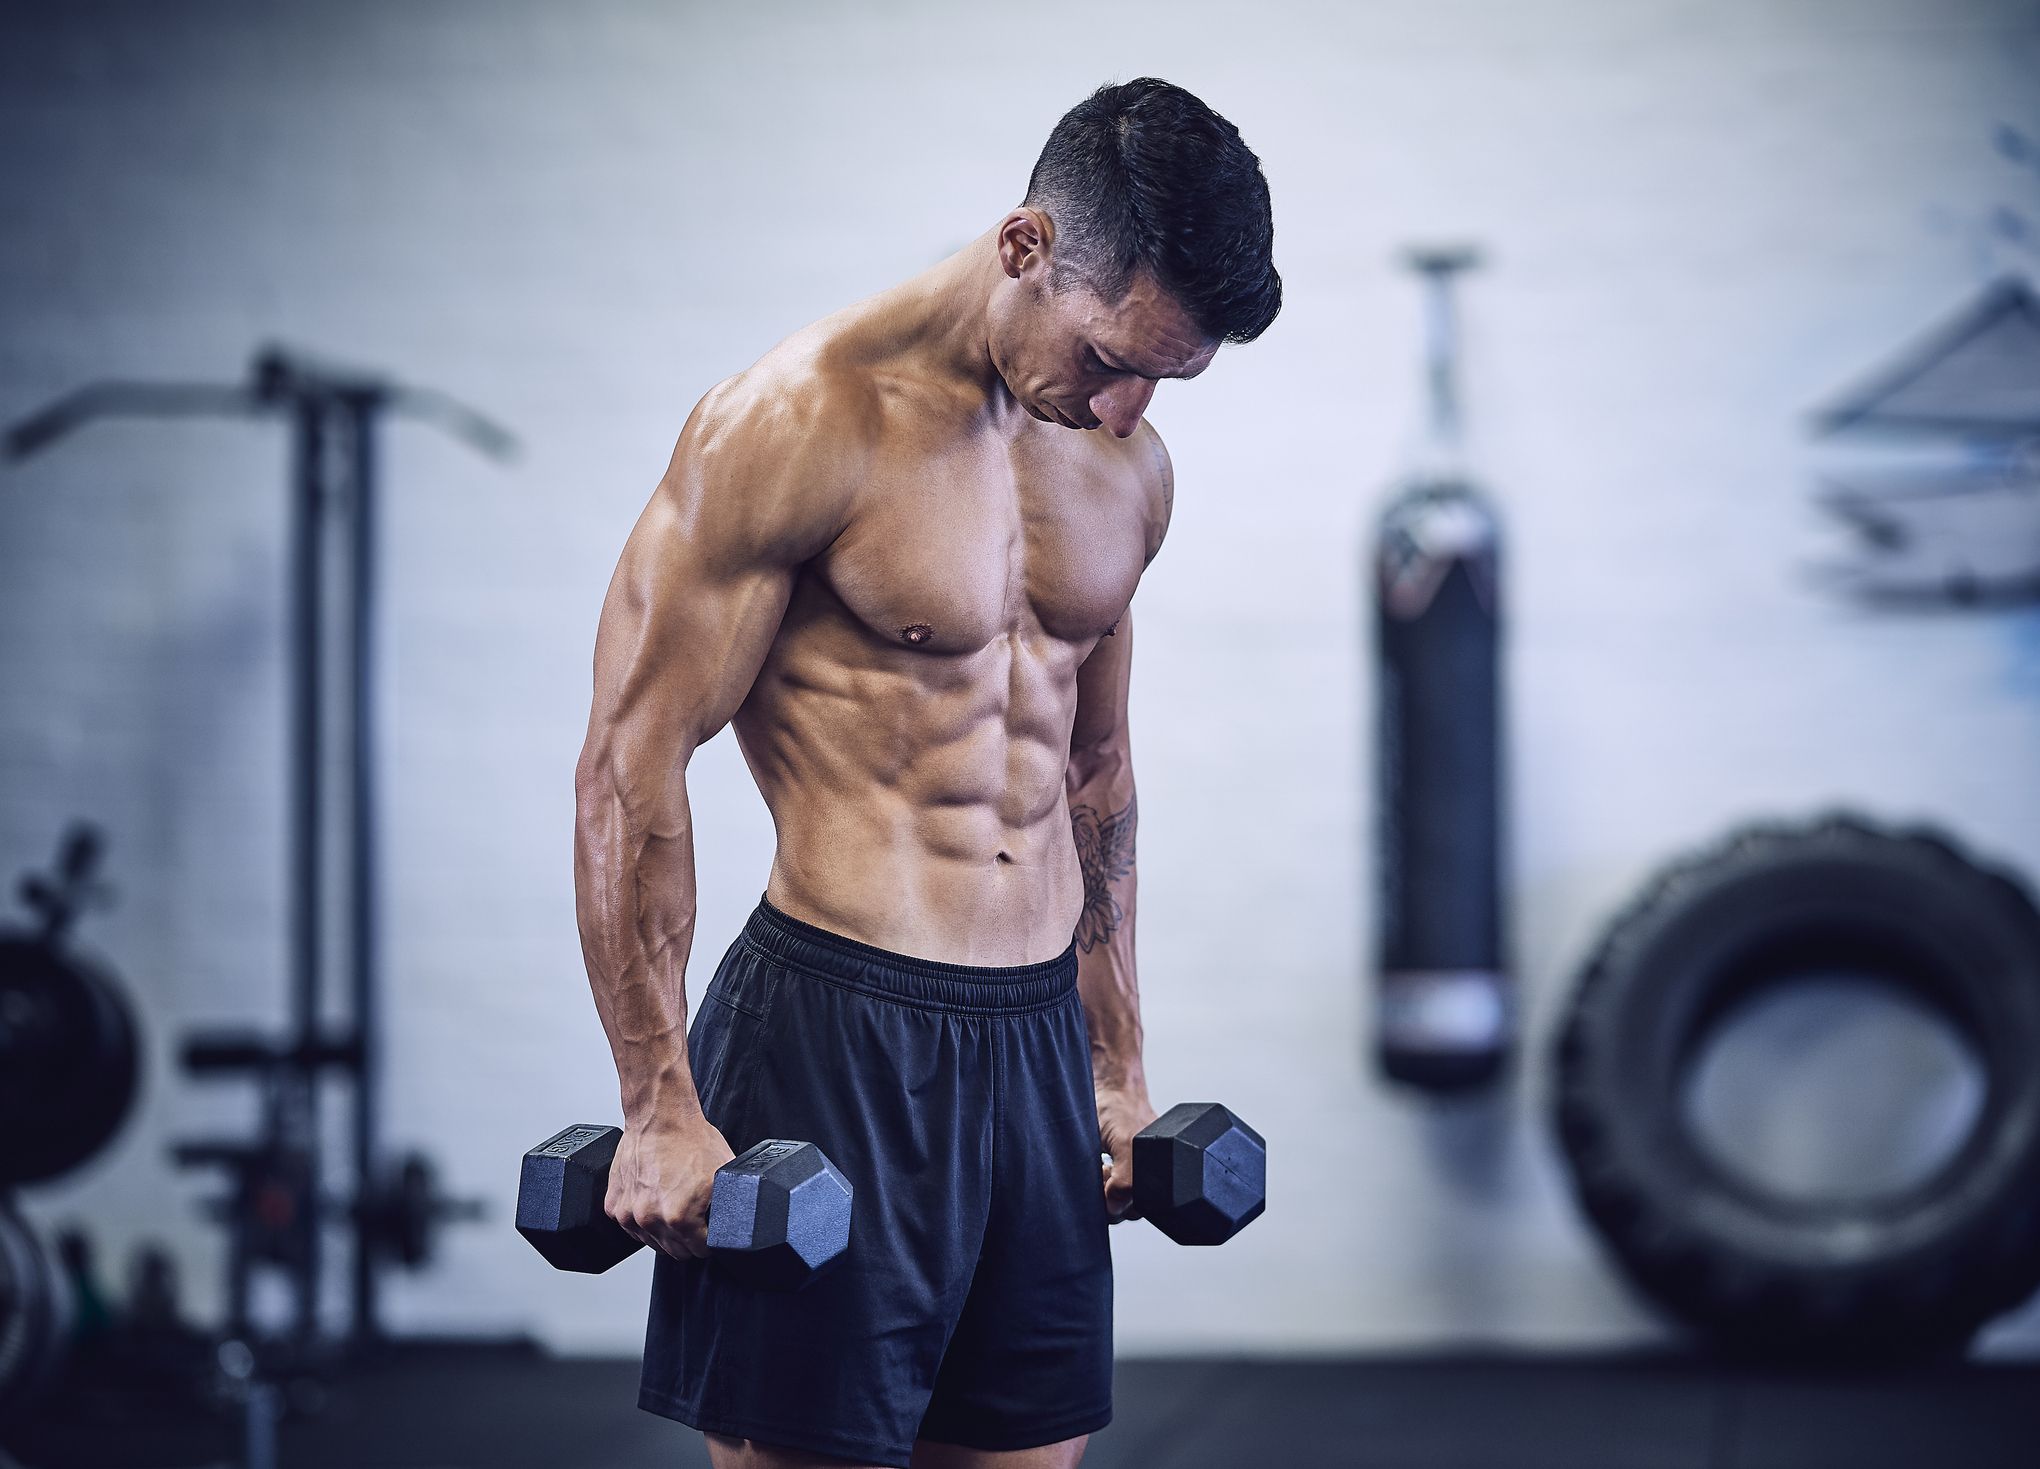 How Long Should A Workout Be To Build Muscle? - SET FOR SET